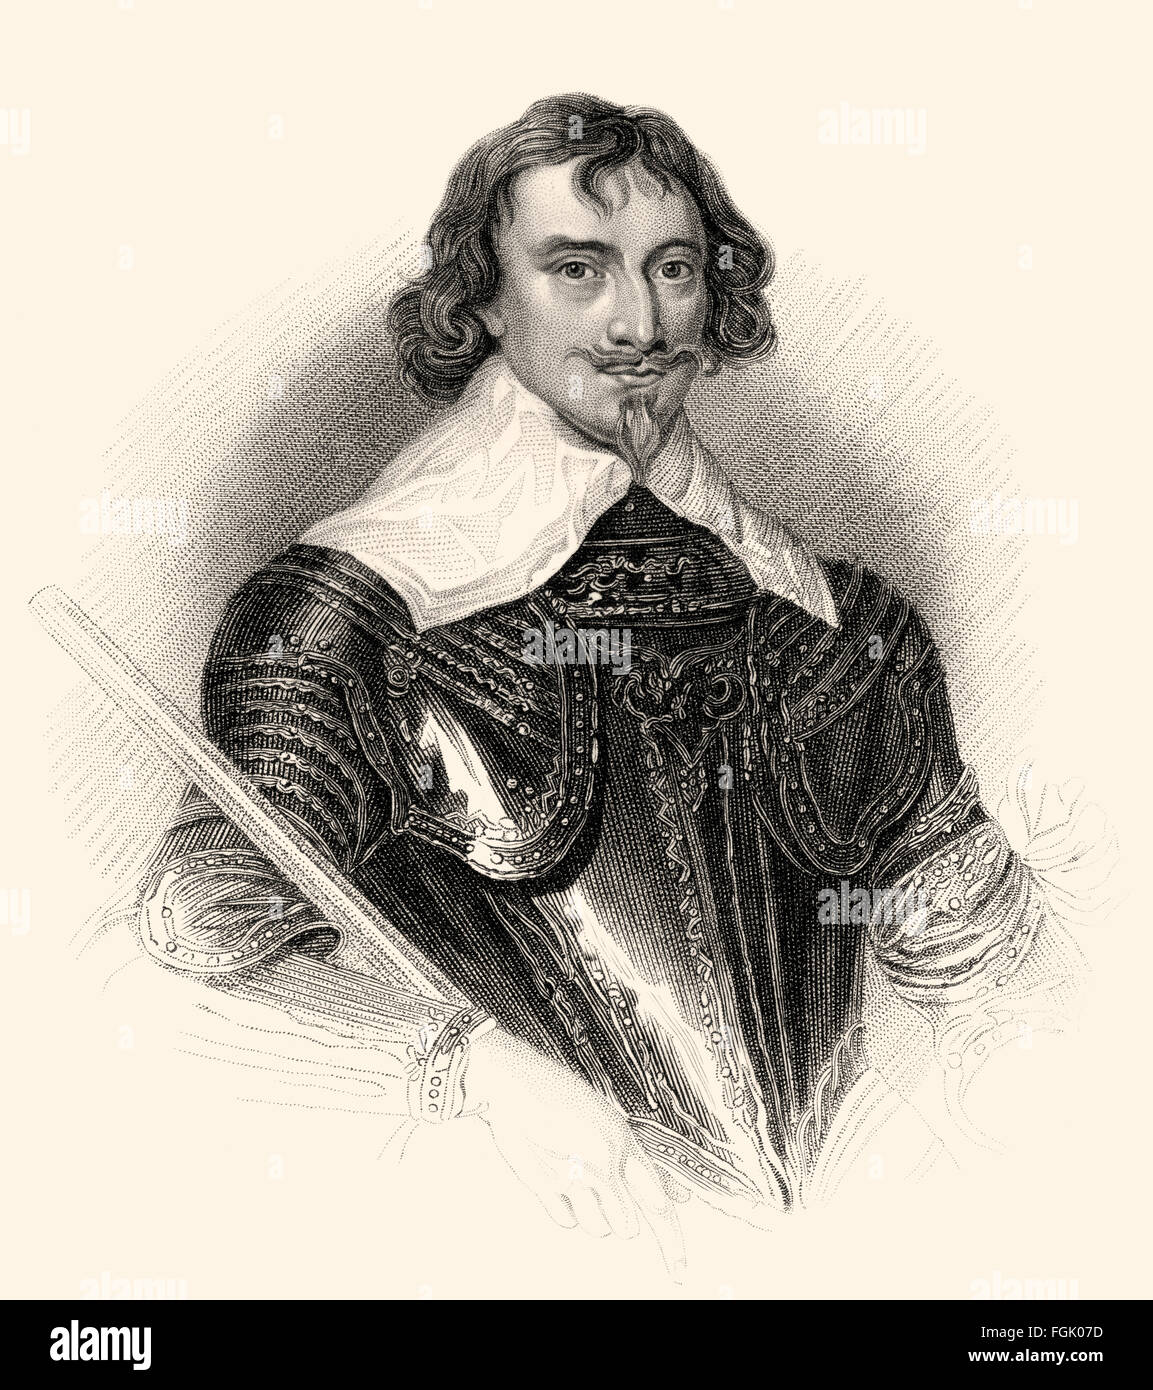 Robert Rich, 2nd Earl of Warwick, 1587-1658, an English colonial administrator, admiral, and Puritan Stock Photo